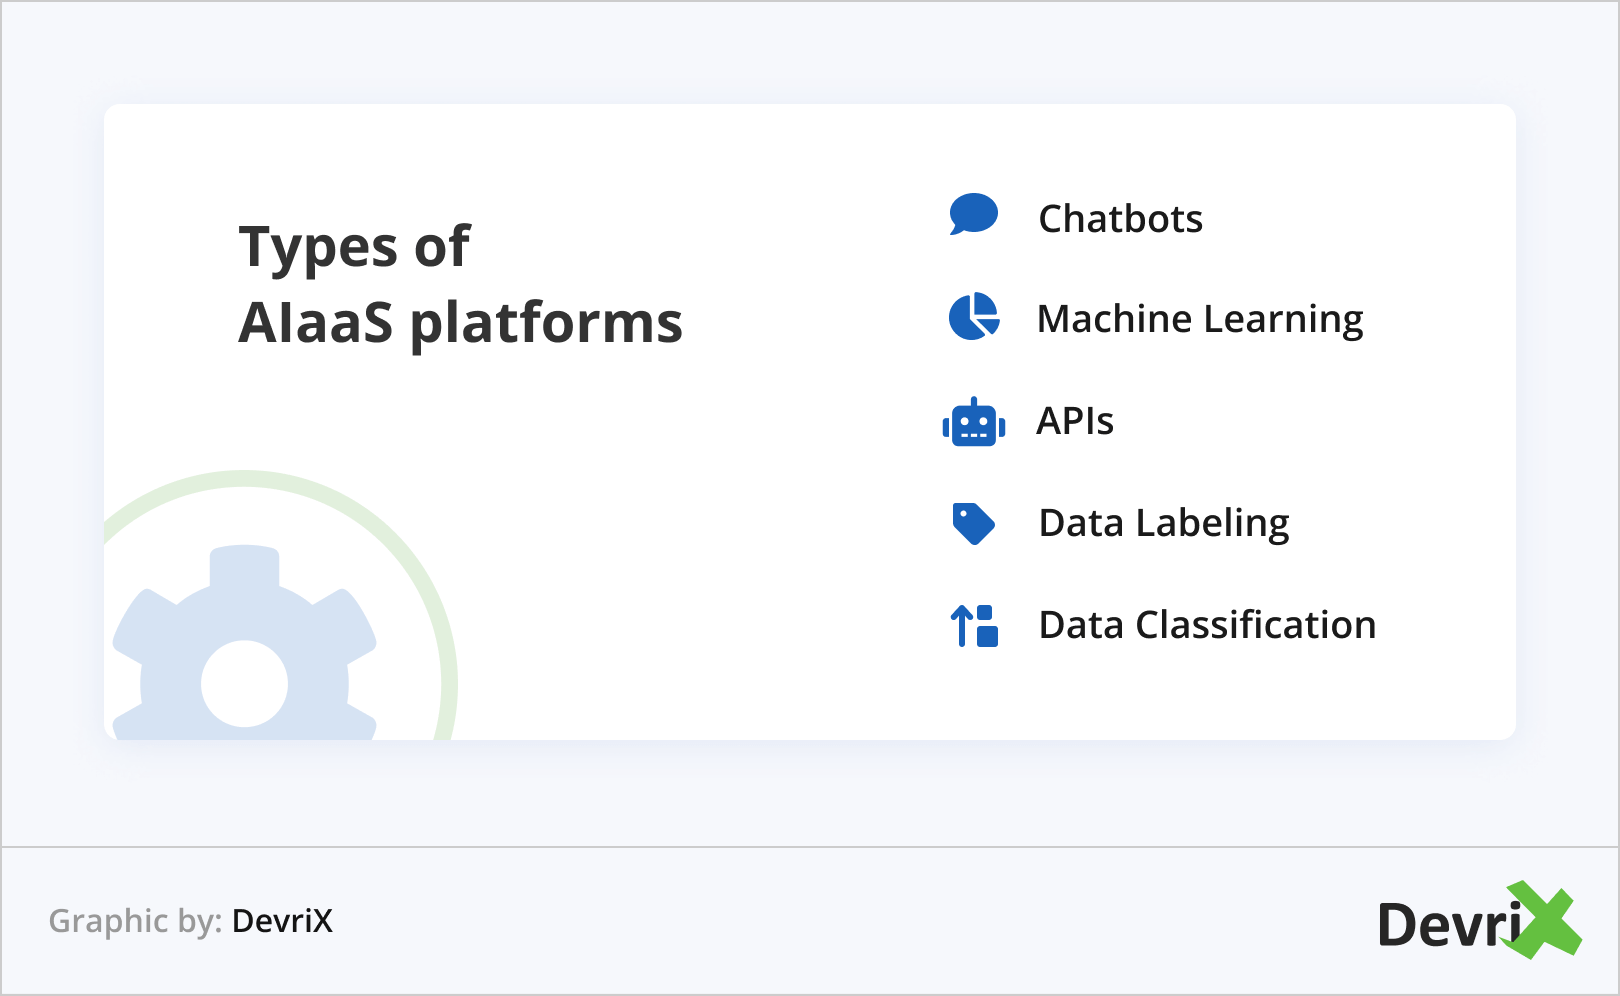 List of AIaaS platform types: Chatbots, Machine Learning, APIs, Data Labeling, and Data Classification with associated icons.